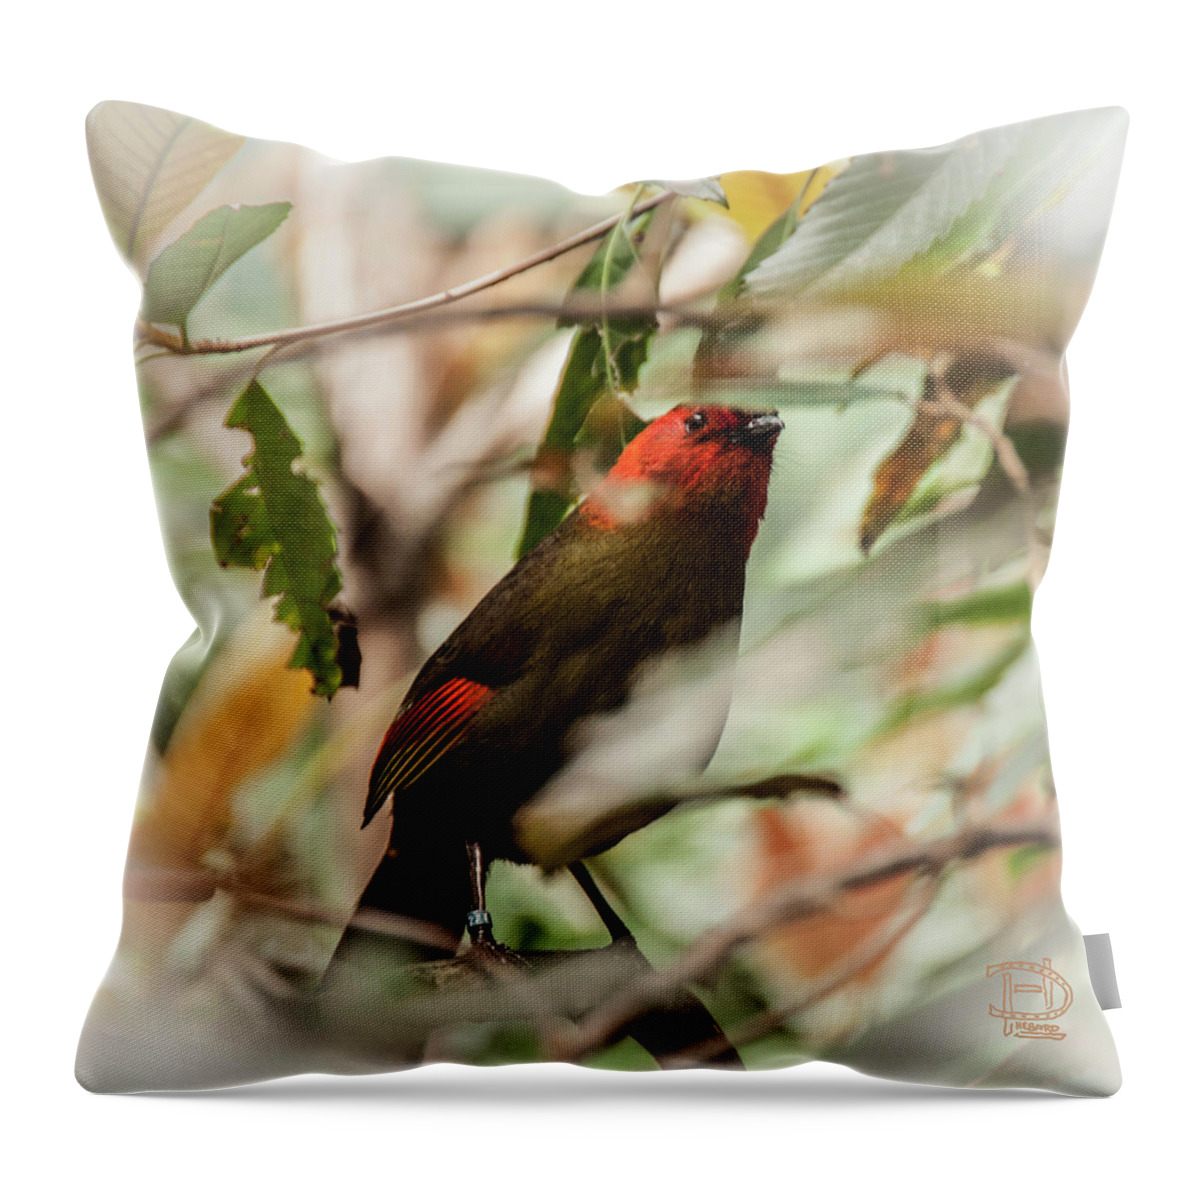  Scarlet-faced Liocichla.noted Species Variations Throw Pillow featuring the photograph Scarlet-faced Liocichla by Daniel Hebard